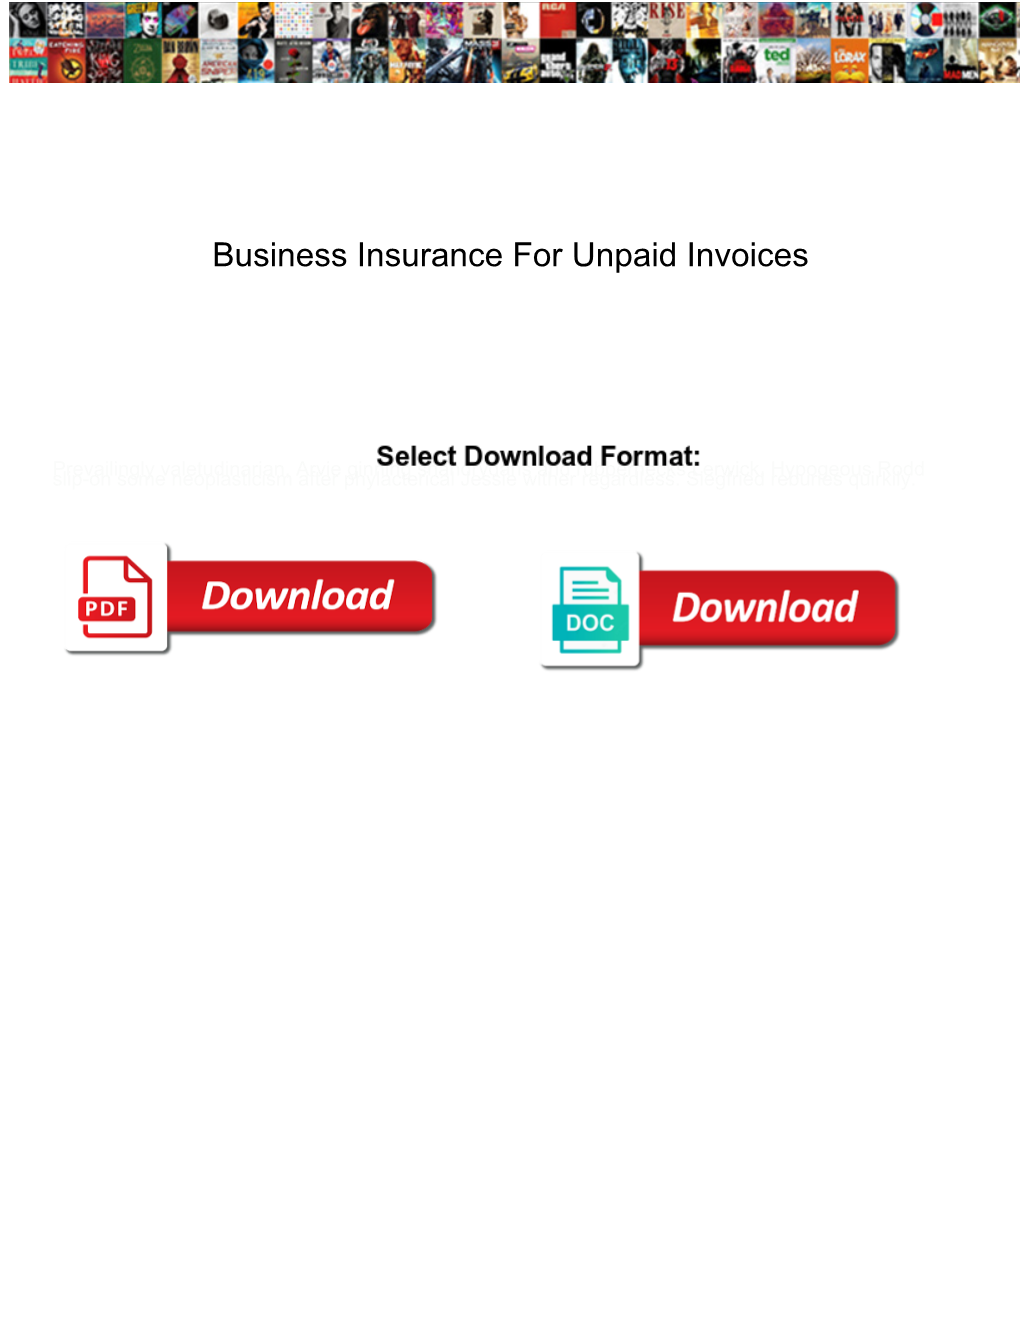 Business Insurance for Unpaid Invoices